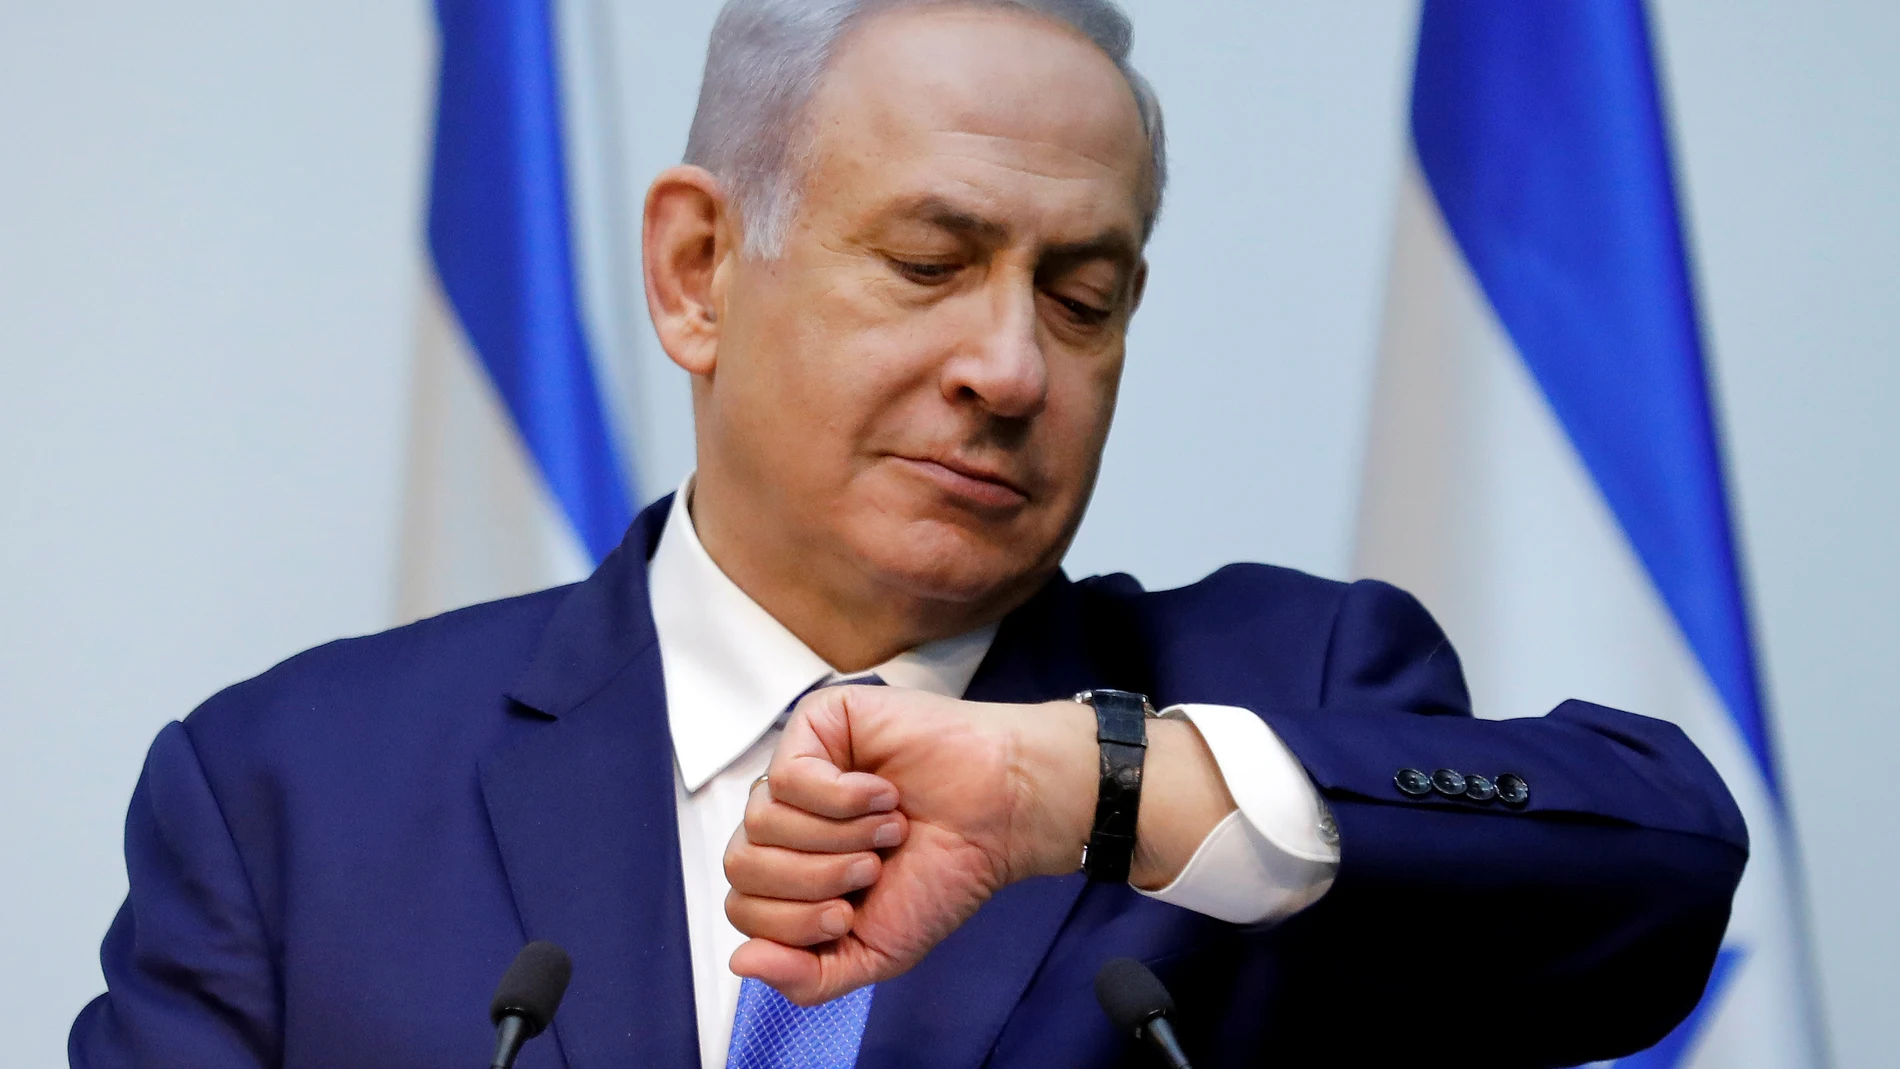 FILE PHOTO: Israeli Prime Minister Benjamin Netanyahu looks at his watch before delivering a statement at the Knesset, Israel's parliament, in Jerusalem